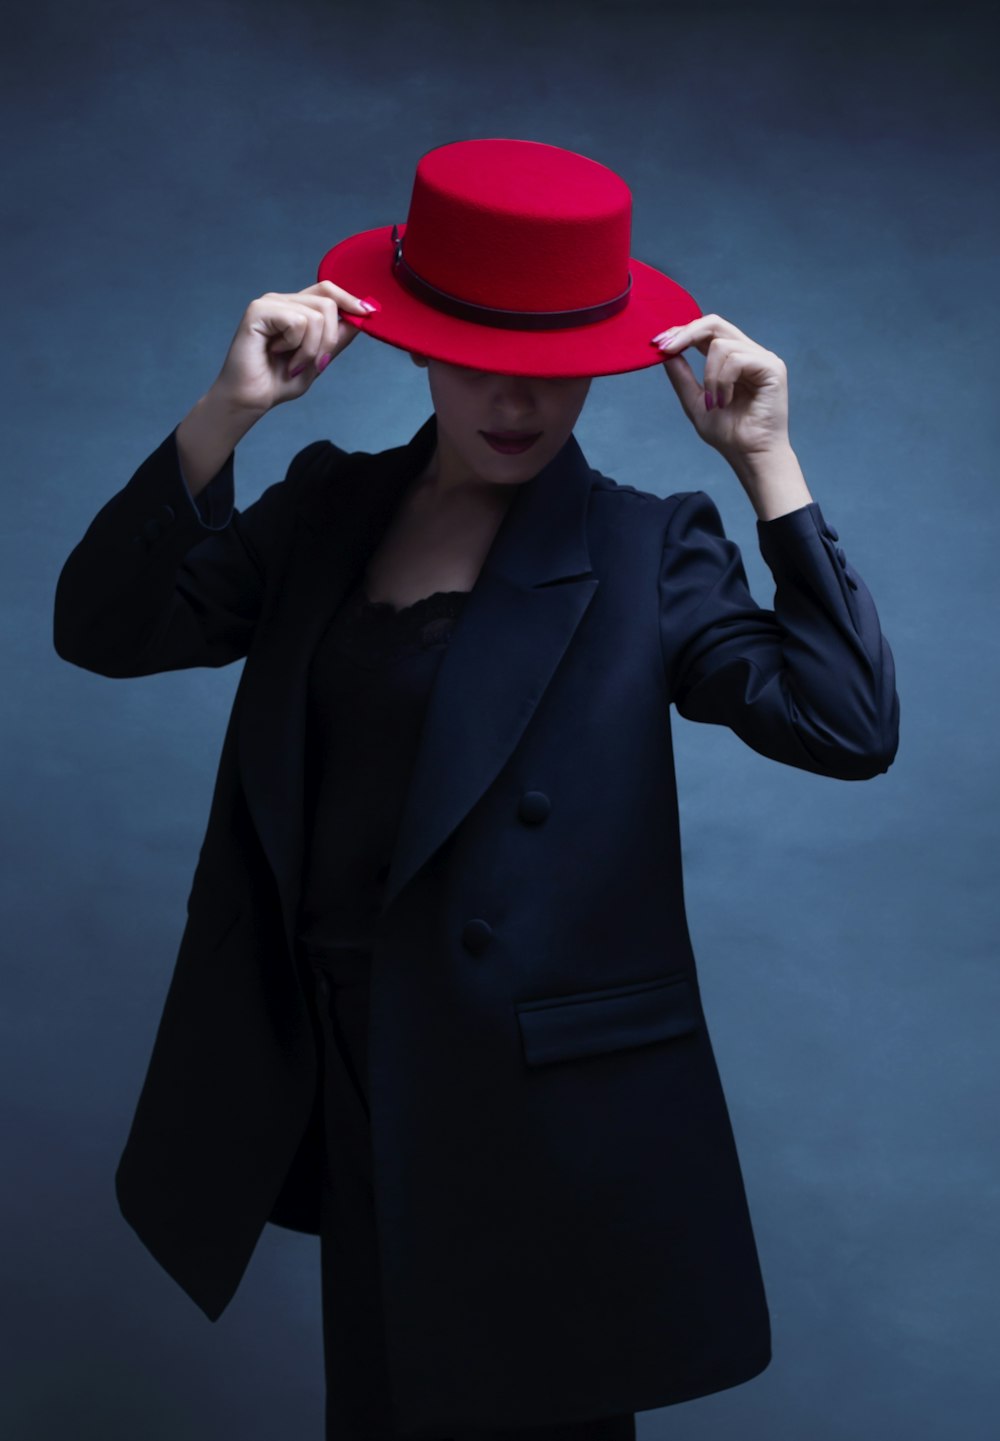 a woman wearing a red hat and a black jacket